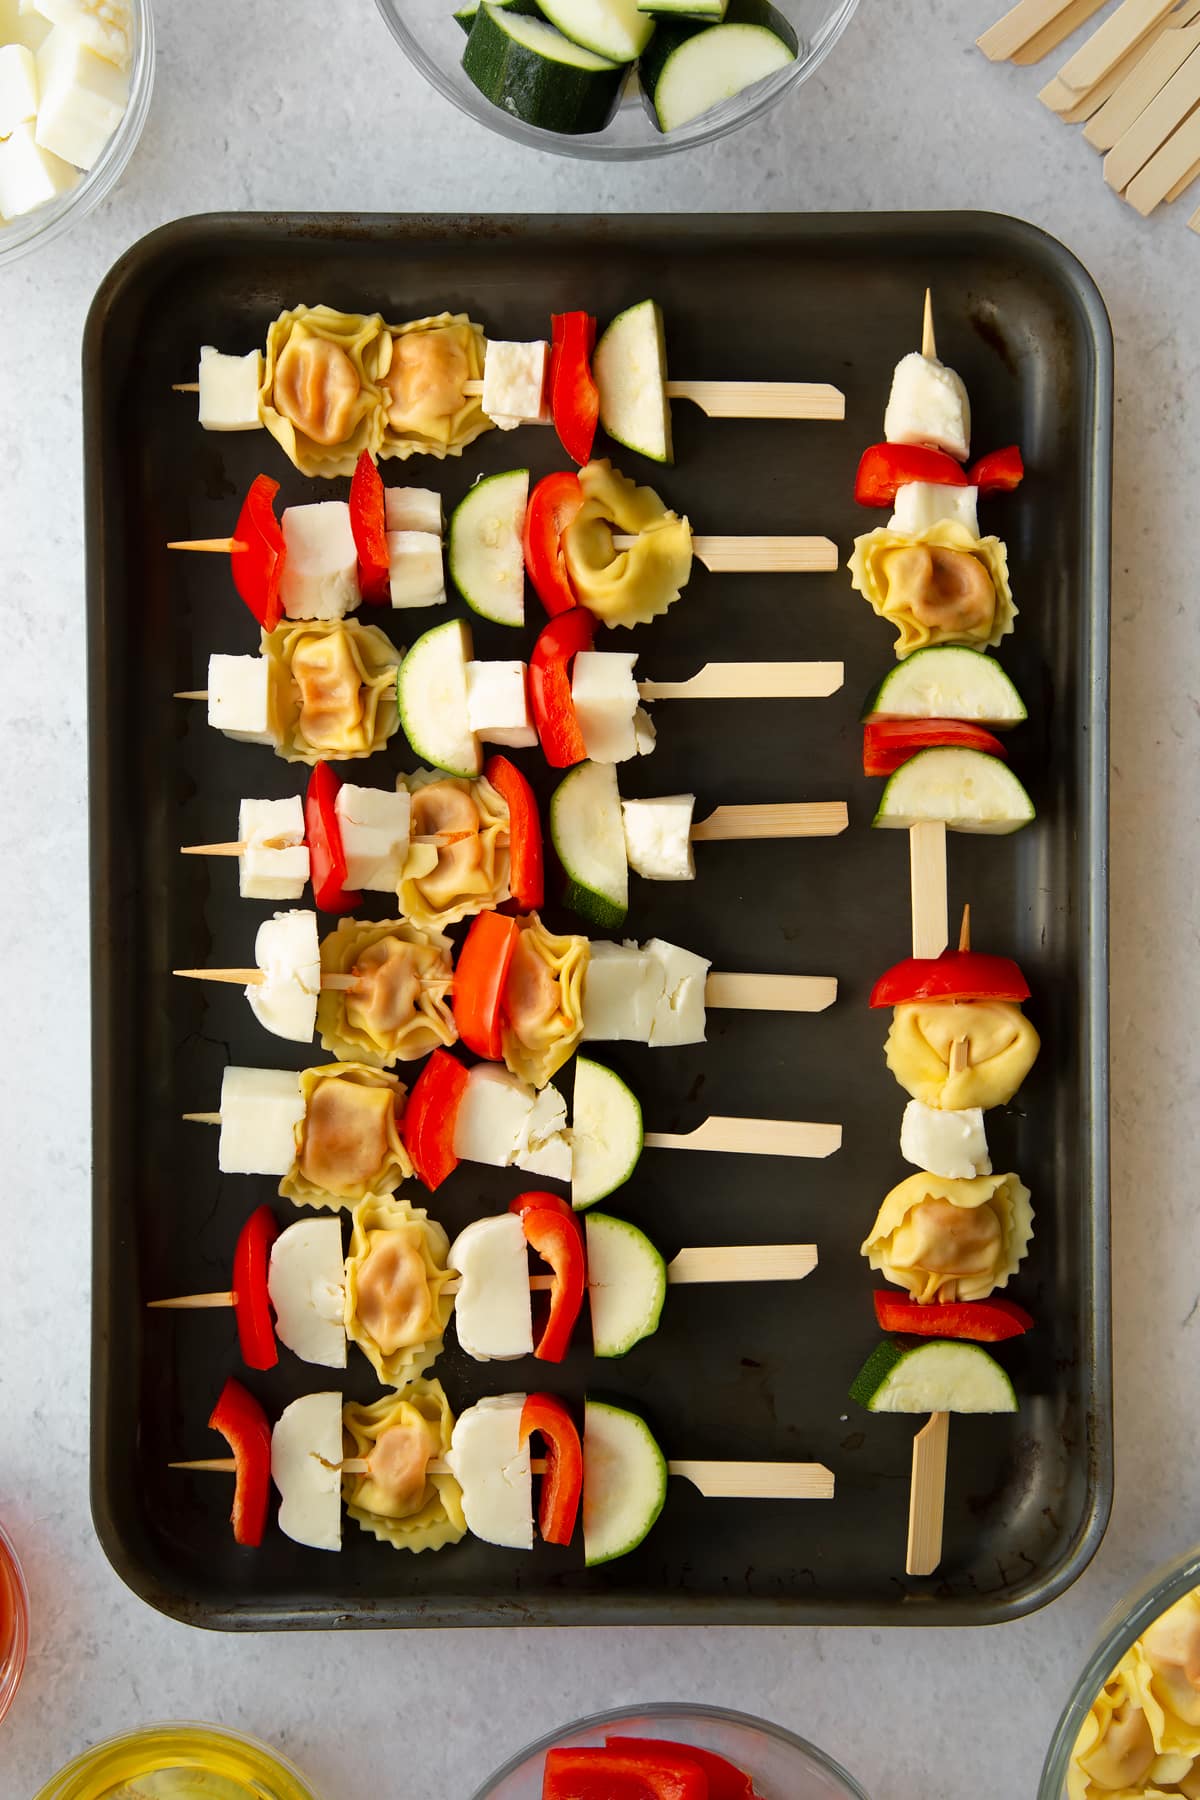 raw courgette, tortellini, halloumi and red pepper on wooden skewers placed on a baking tray.